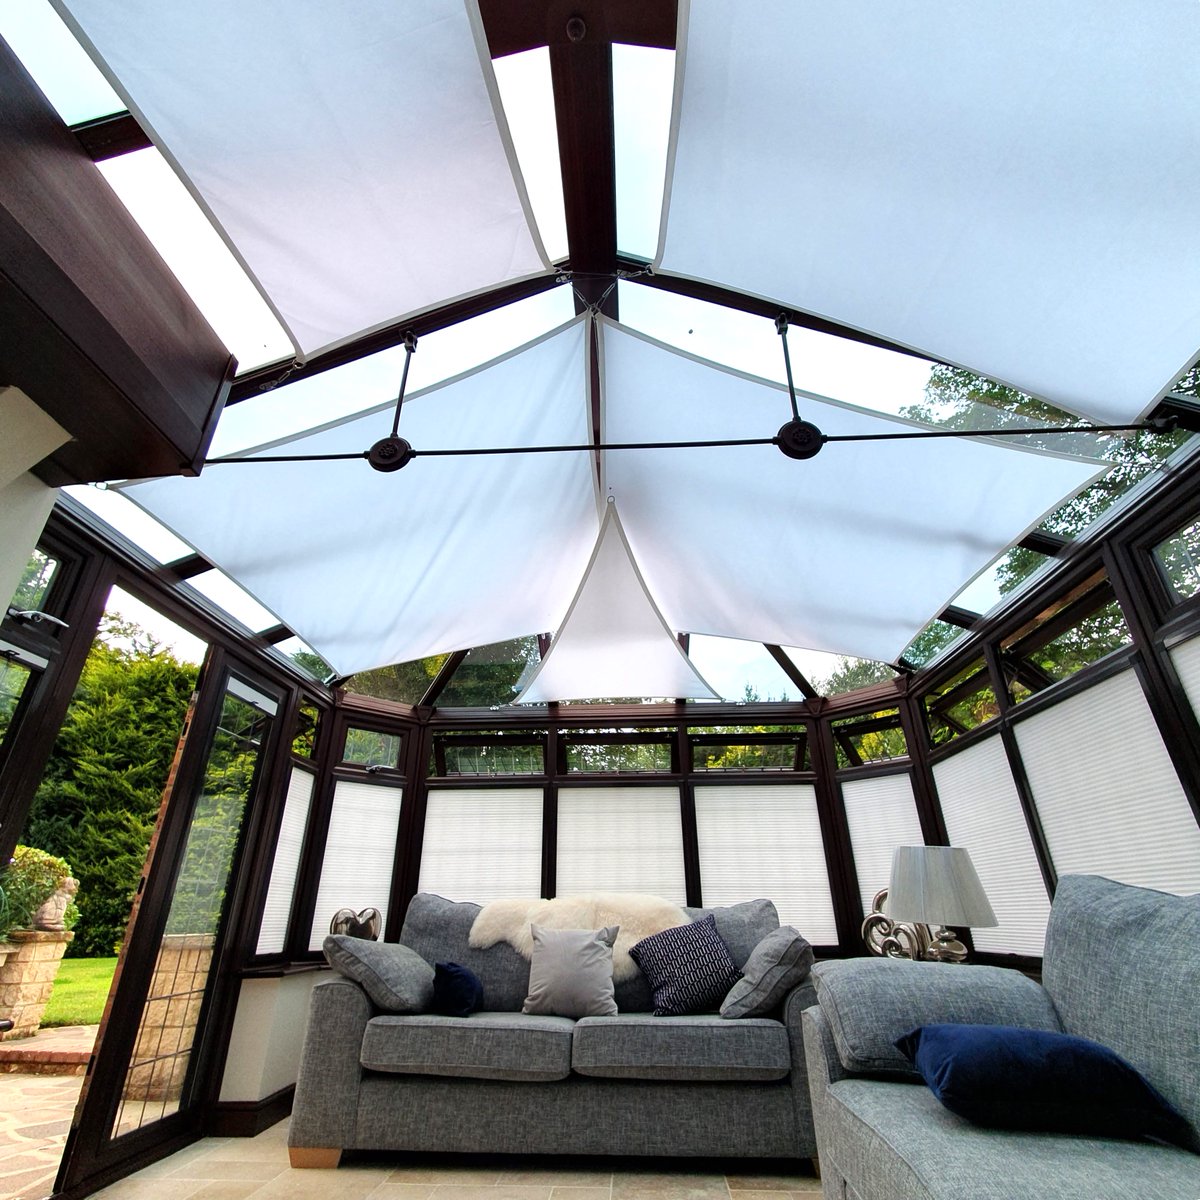 #throwbackthursday - the first set of DIY Made to Measure Shade Sails from the service we launched last year! clarashadesails.co.uk
#conservatory #madetomeasure #conservatoryblinds #clarashadesails #shadesails #bespoke #sunshade